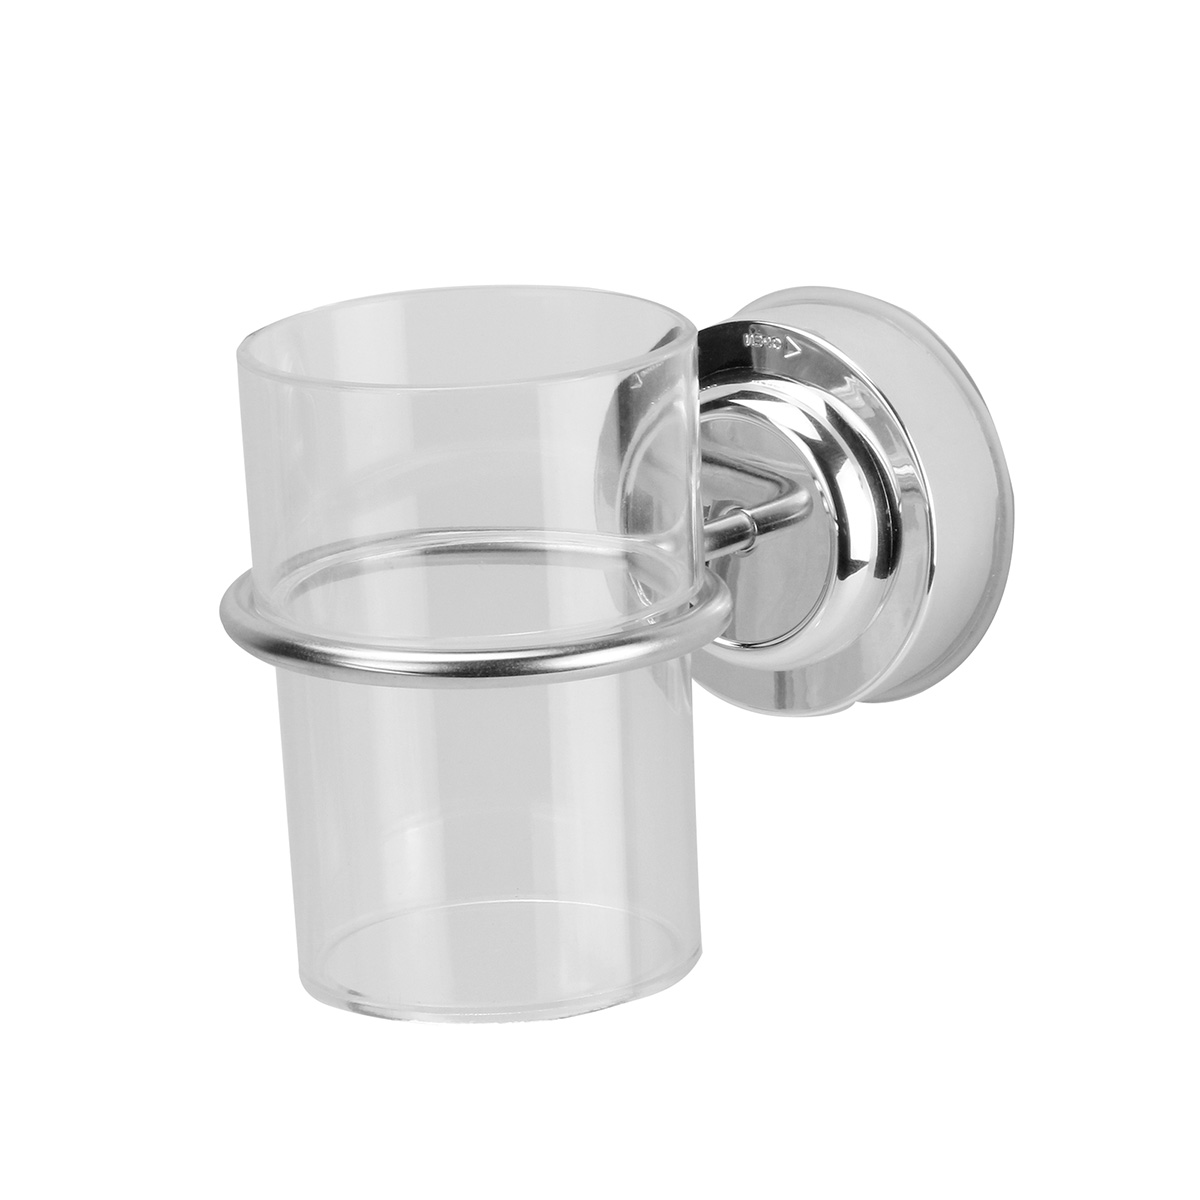 Bathroom-Suction-Wall-Mounted-Single-Stainless-Toothbrush-Tumbler-Holder-with-Cup-1758217-6